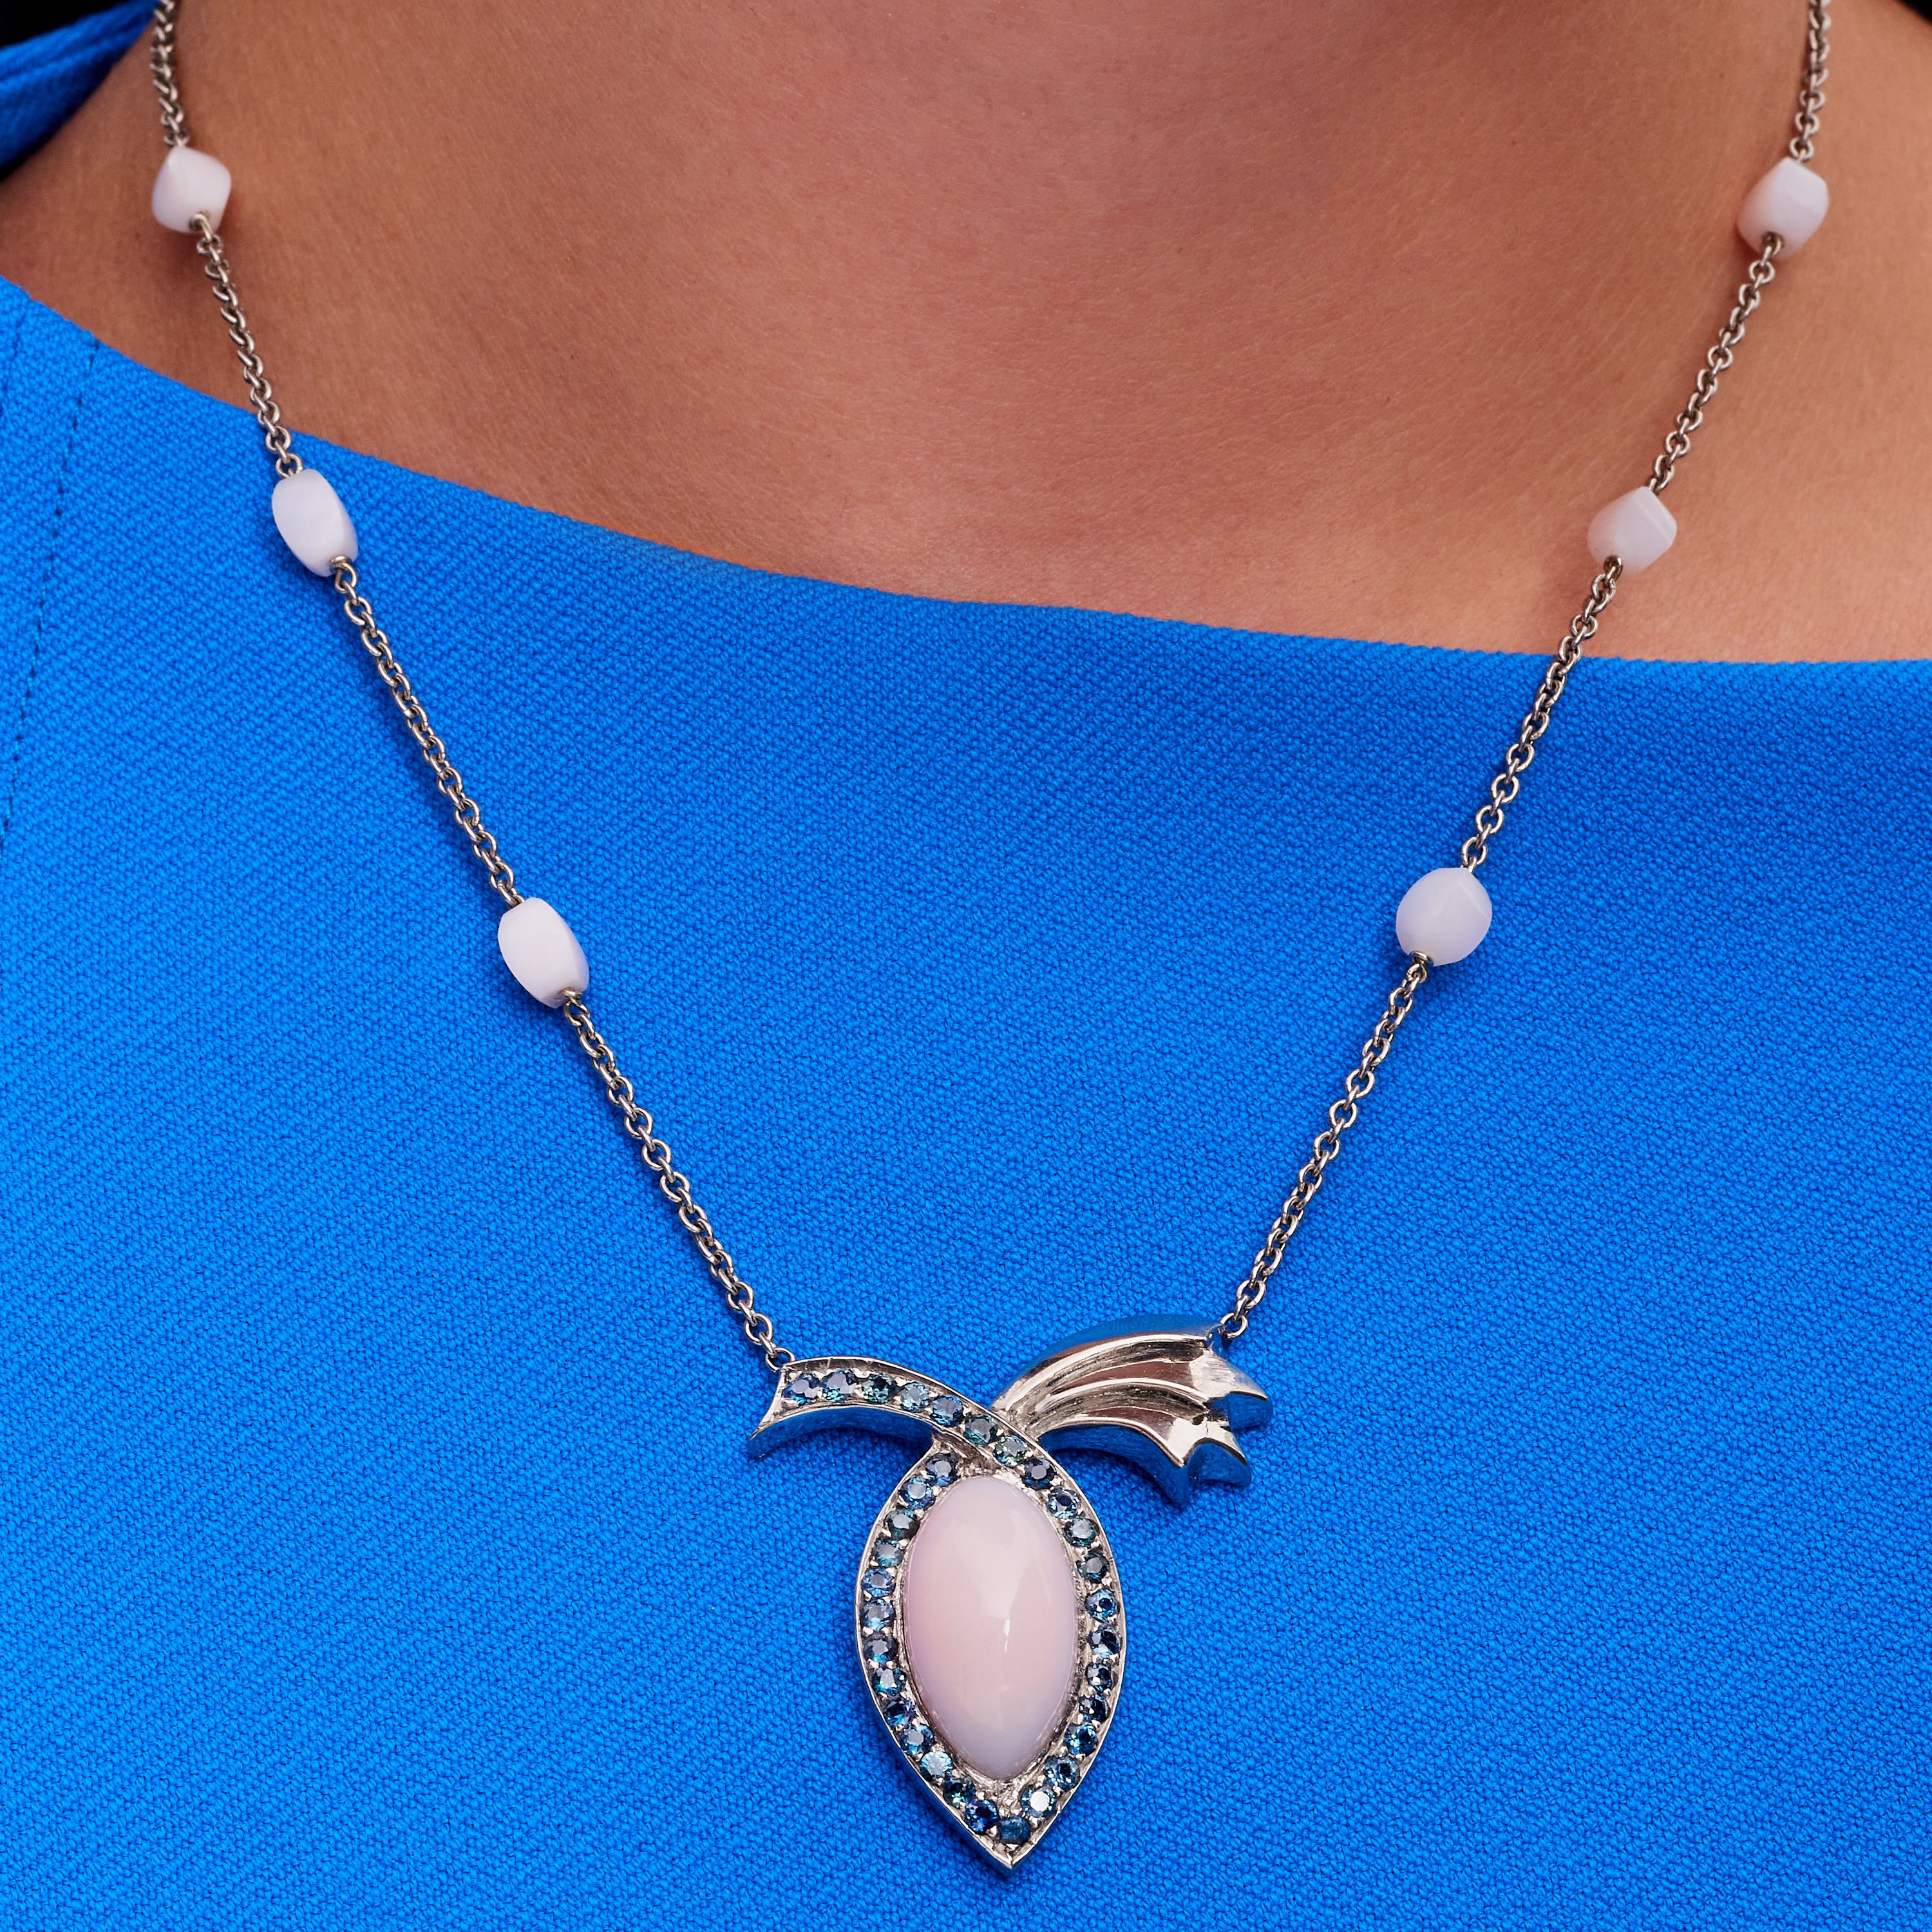 Ribbons Collection, Peruvian Pink Opal Necklace in Palladium